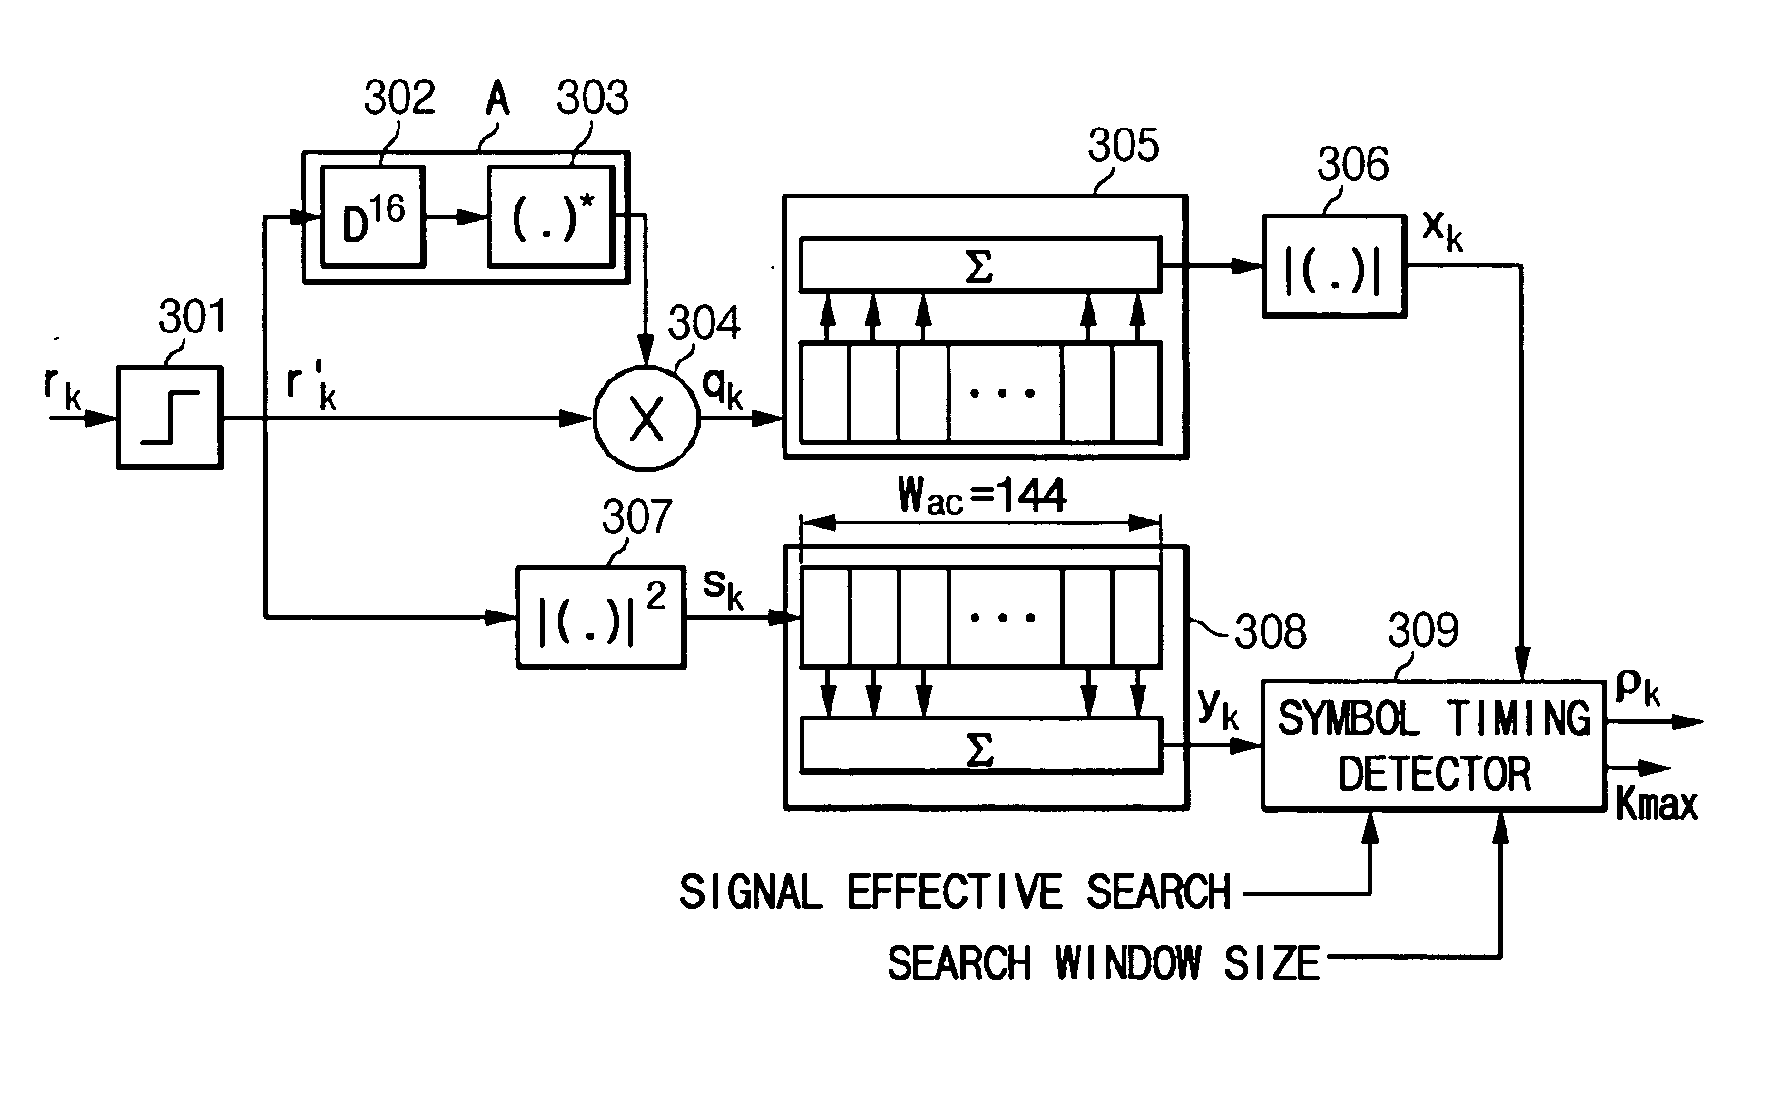 Apparatus for symbol timing detection for wireless communication system